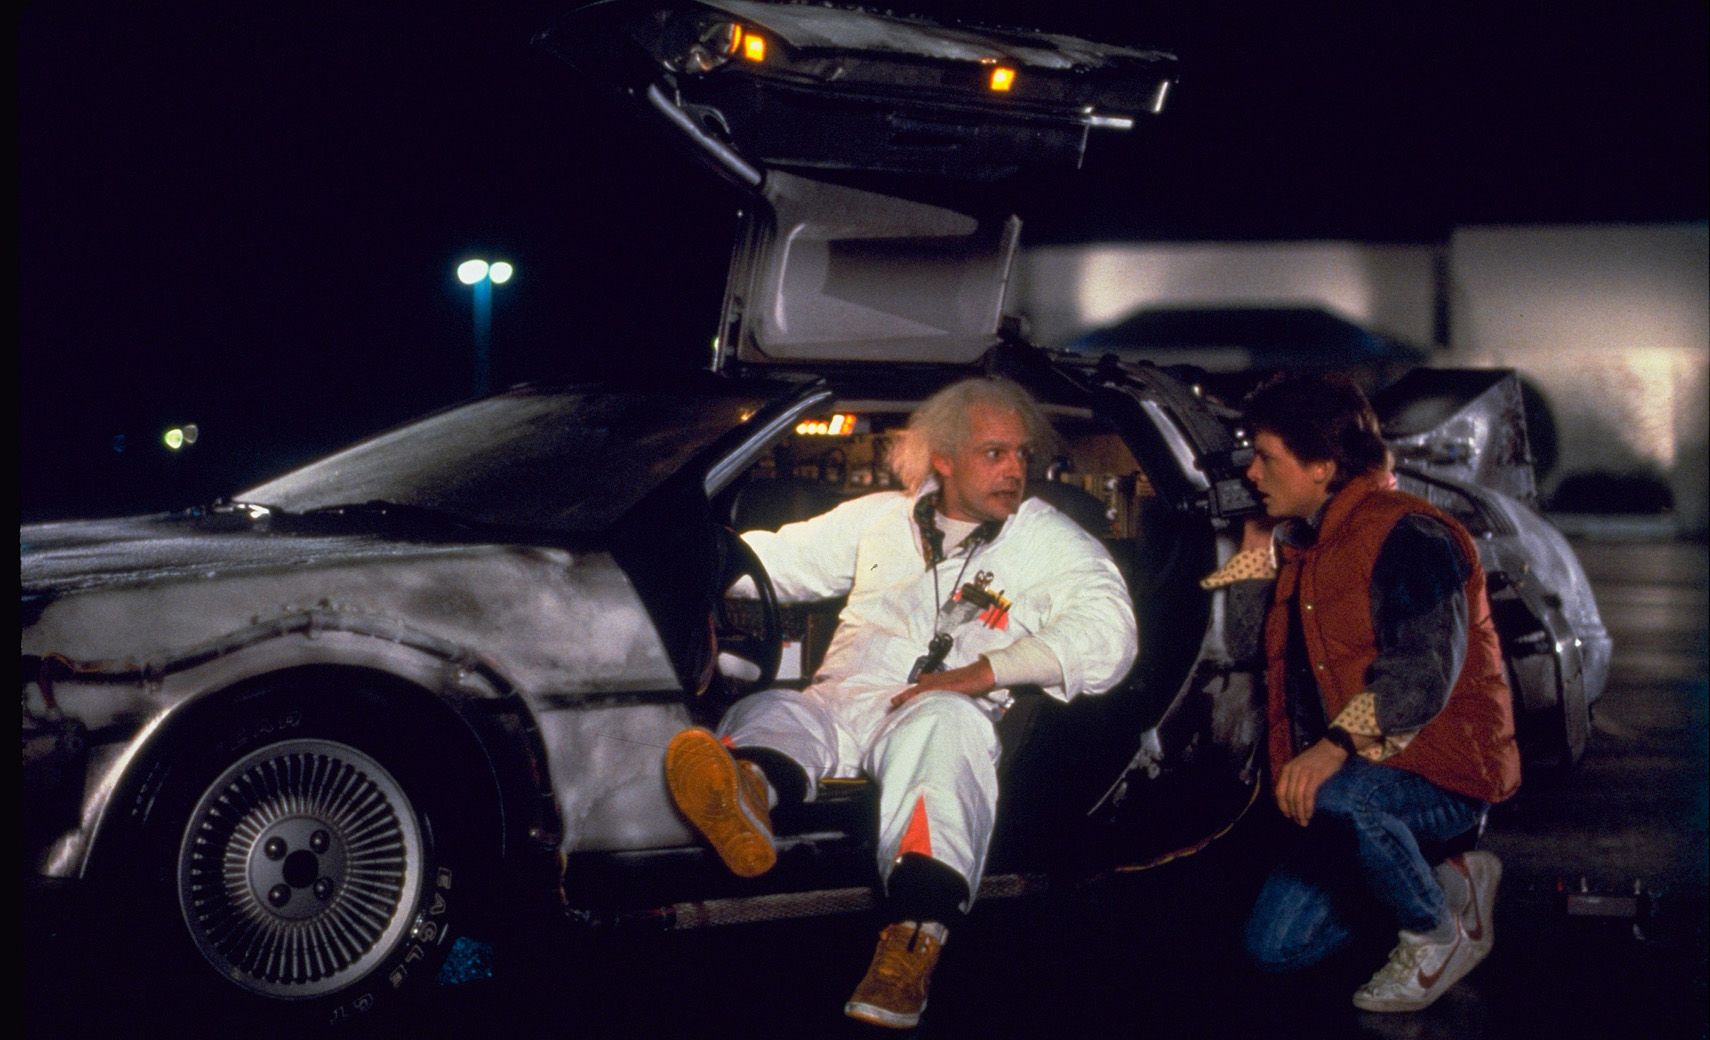 The Silver DMC DeLorean That Became A Sensation In The Movie 'Back To The Future'